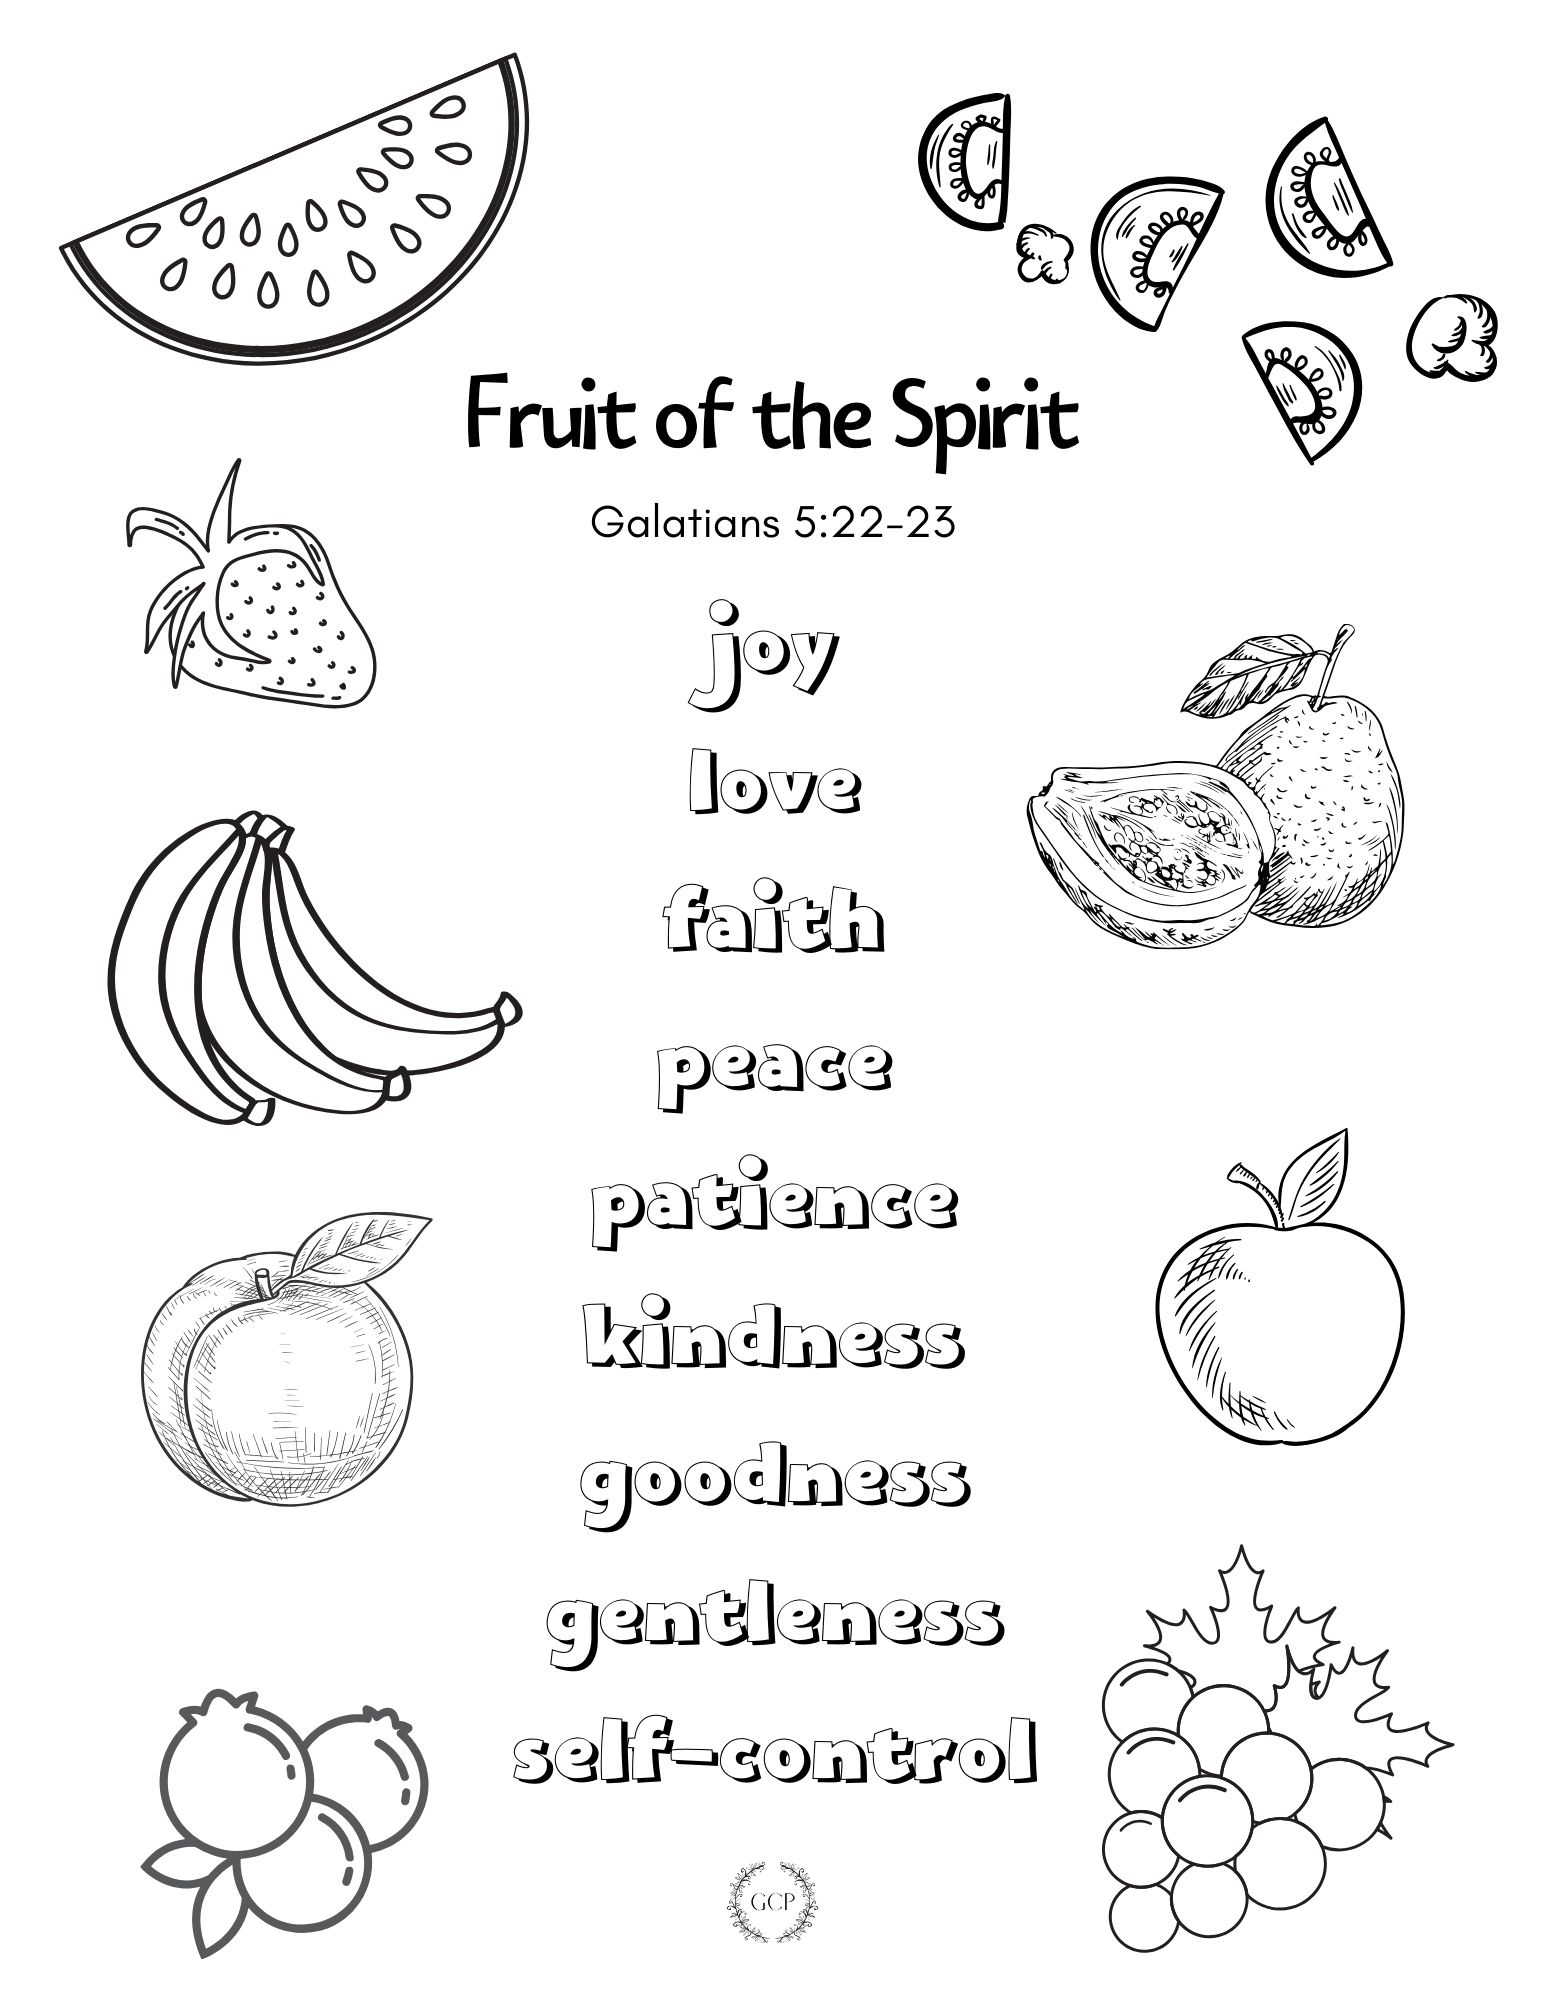 Free Bible Coloring Pages For Kids - Download Now - Gentle Christian ...